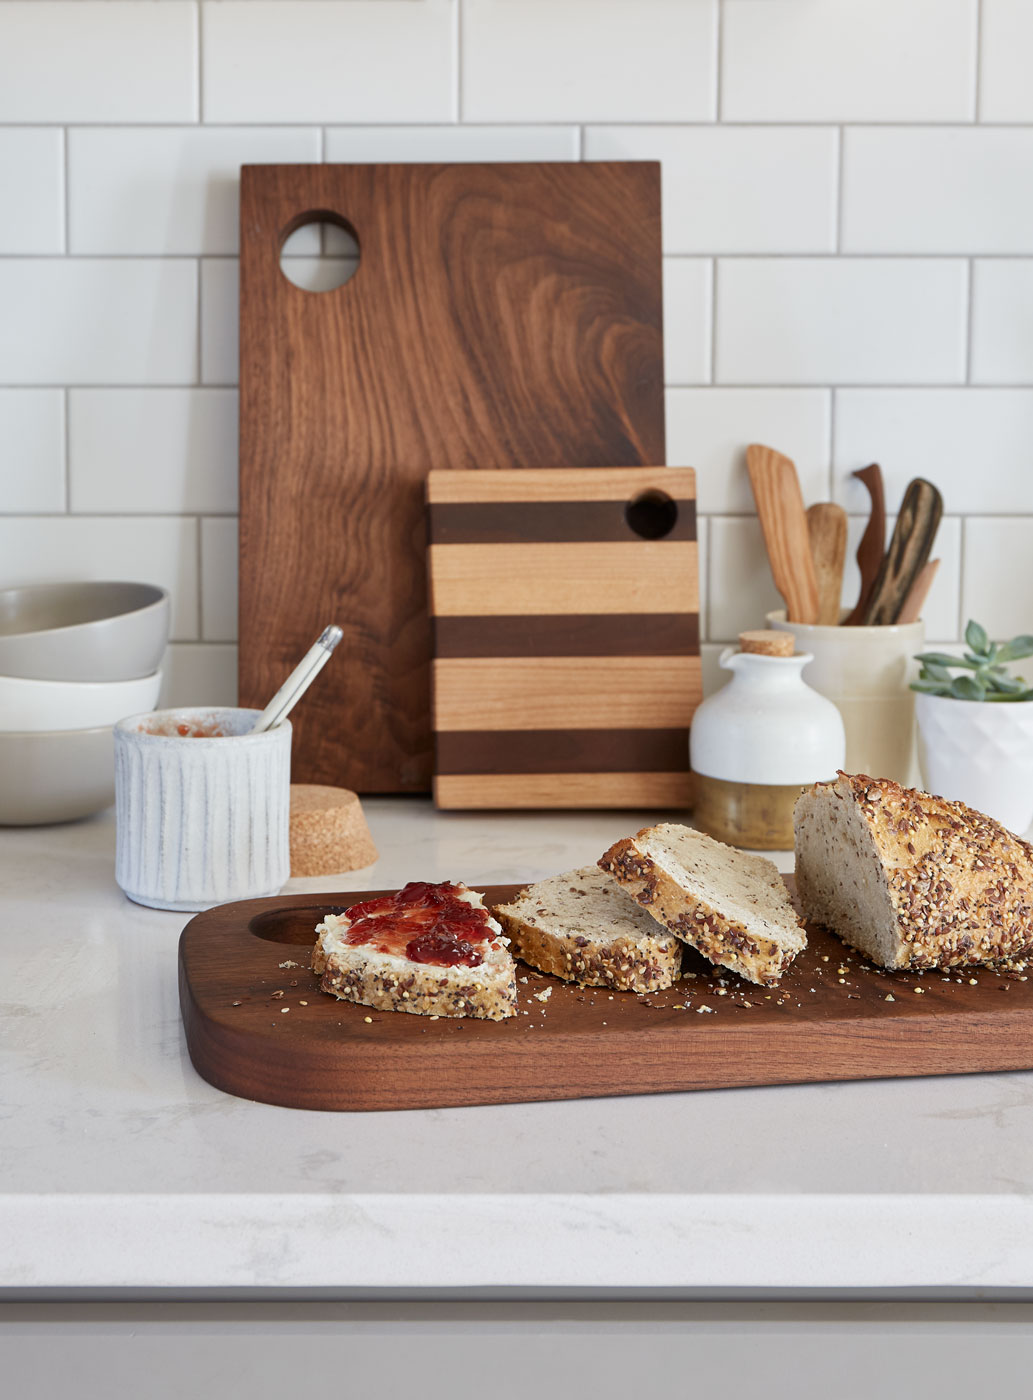 Bread and jam on a kitchen counter with tableware